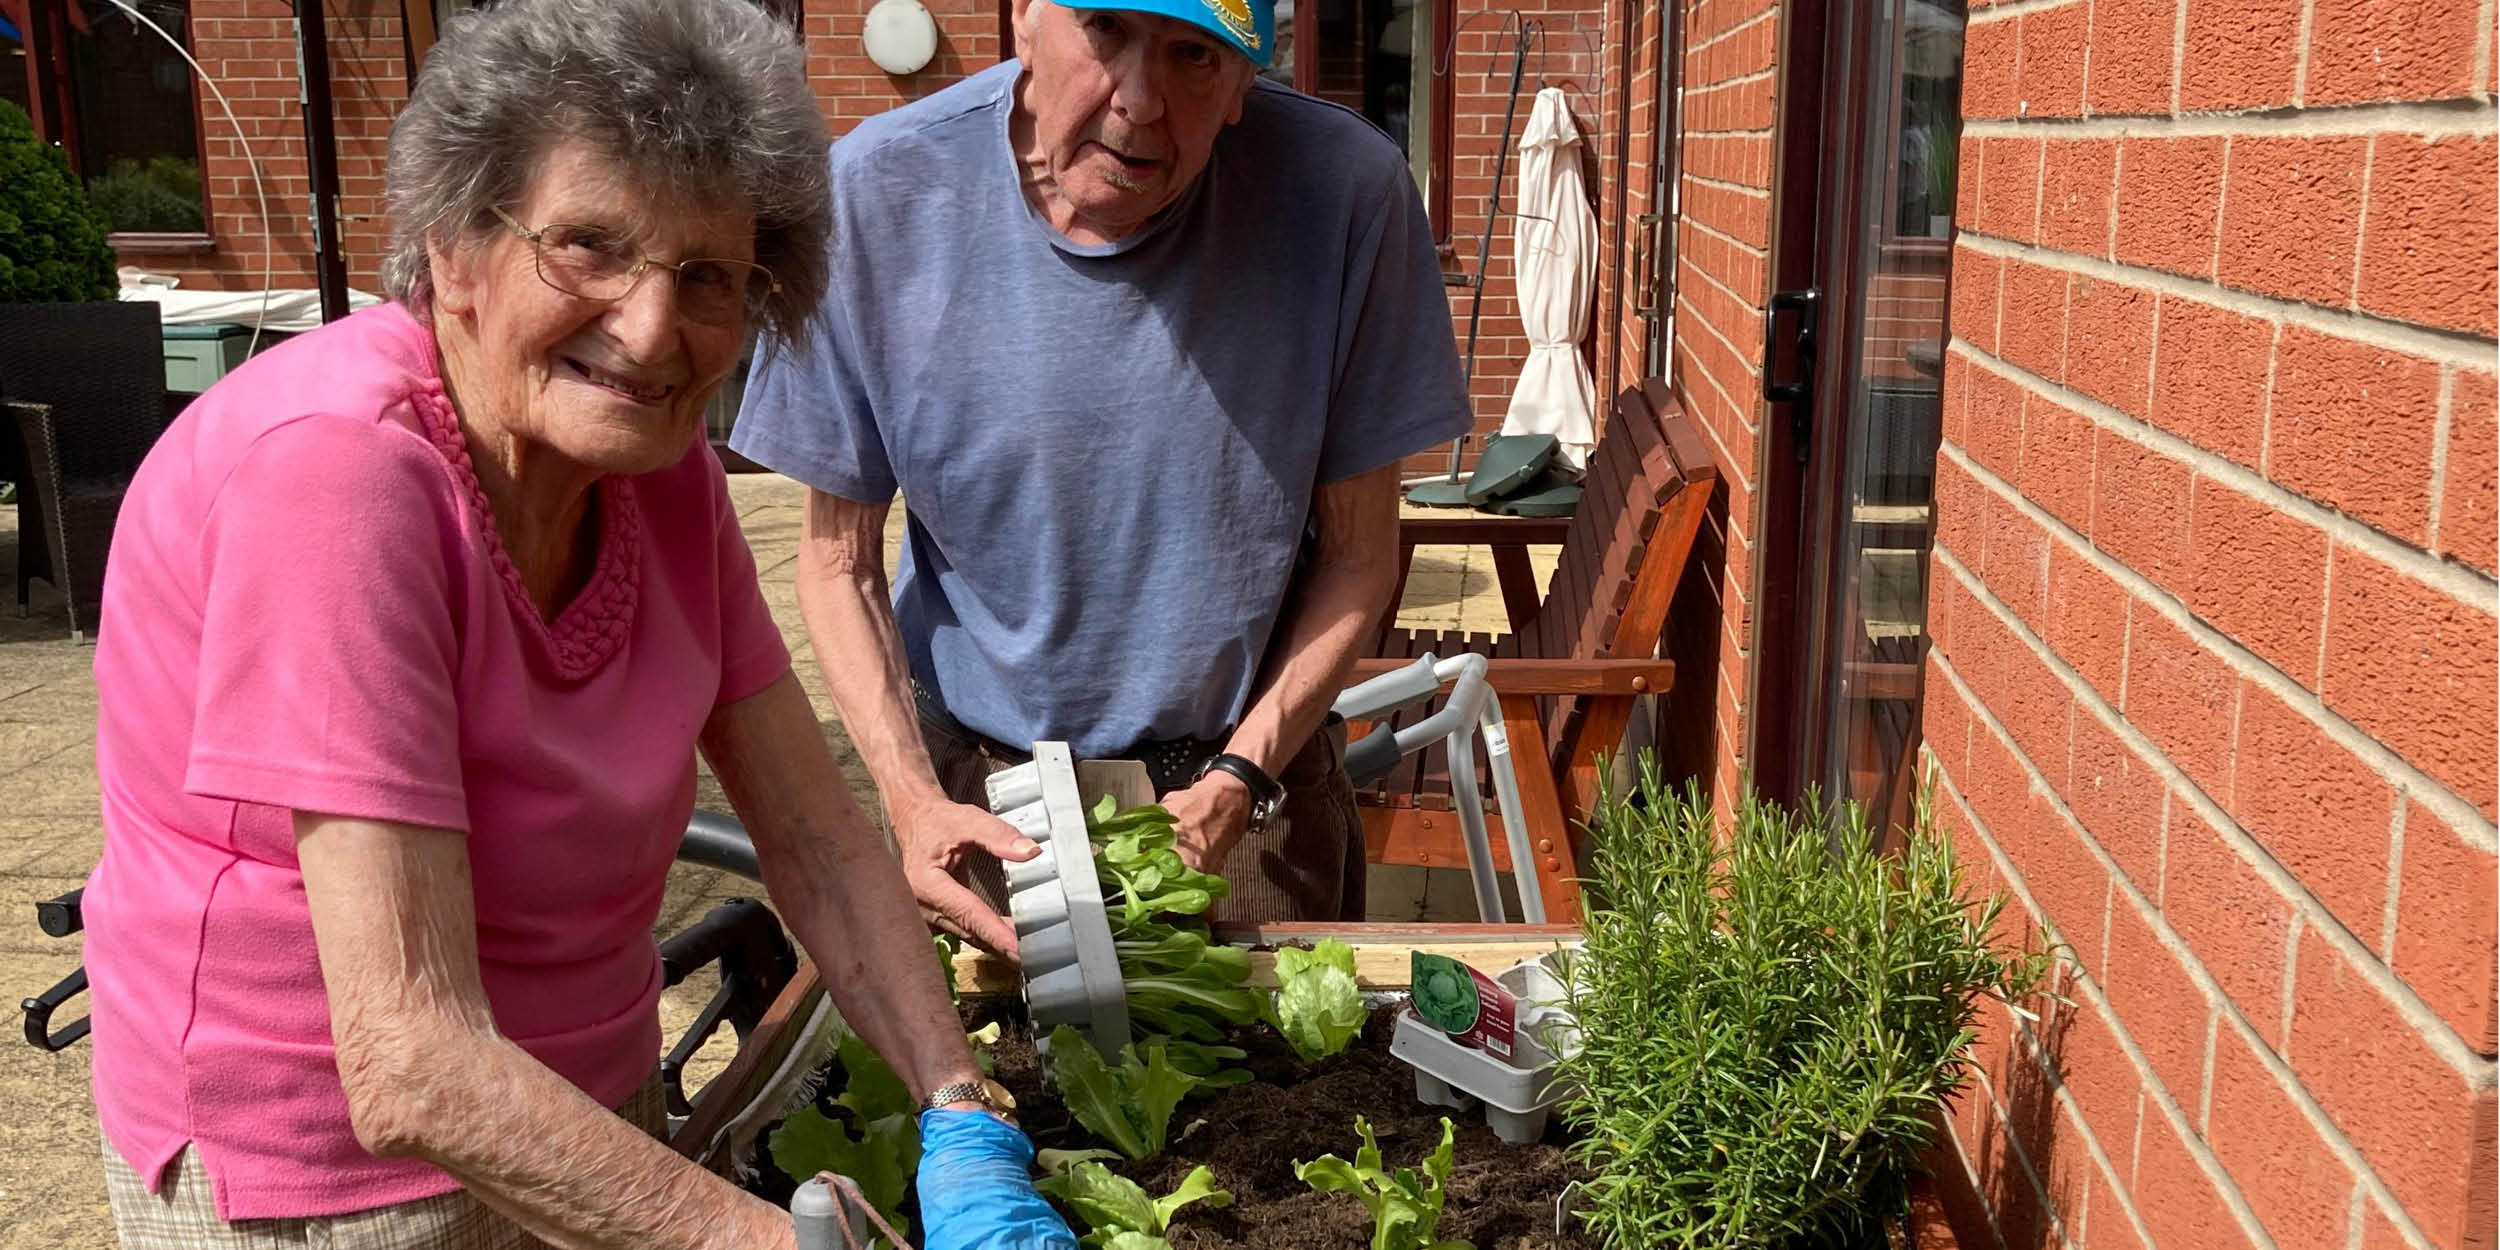 Residents grow herbs to use in home's menus